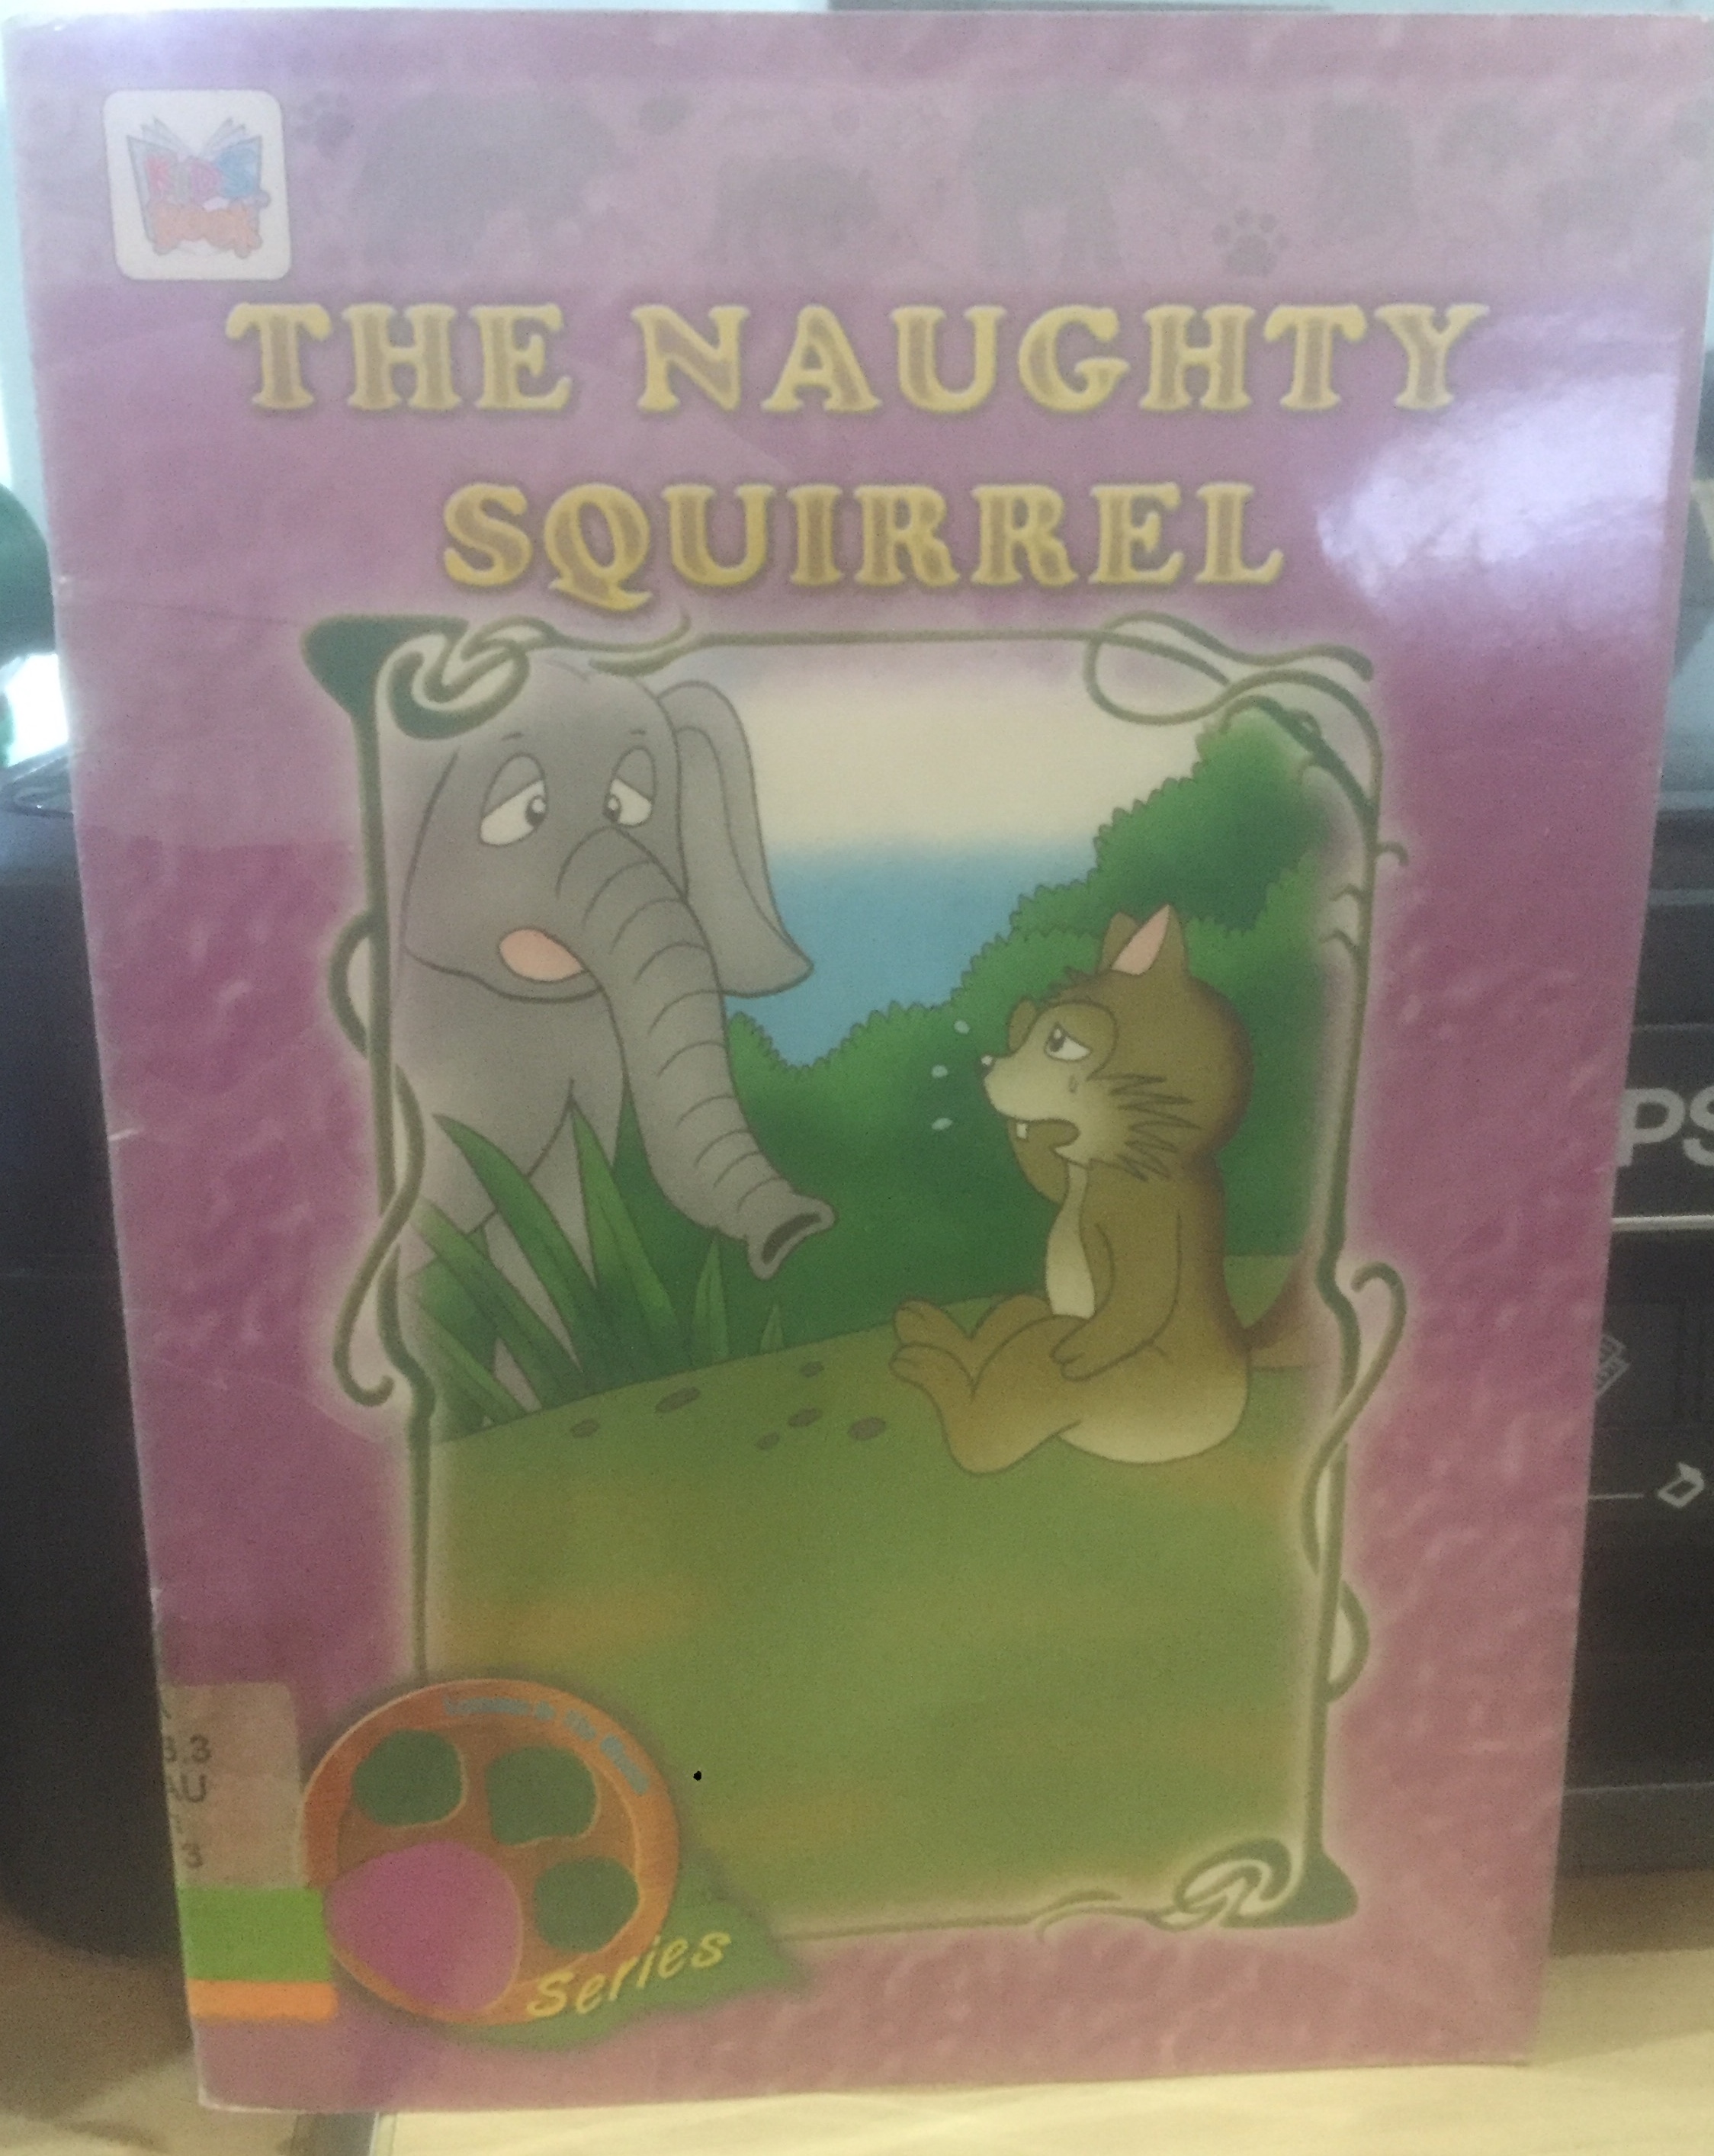 The Naughty Squirrel